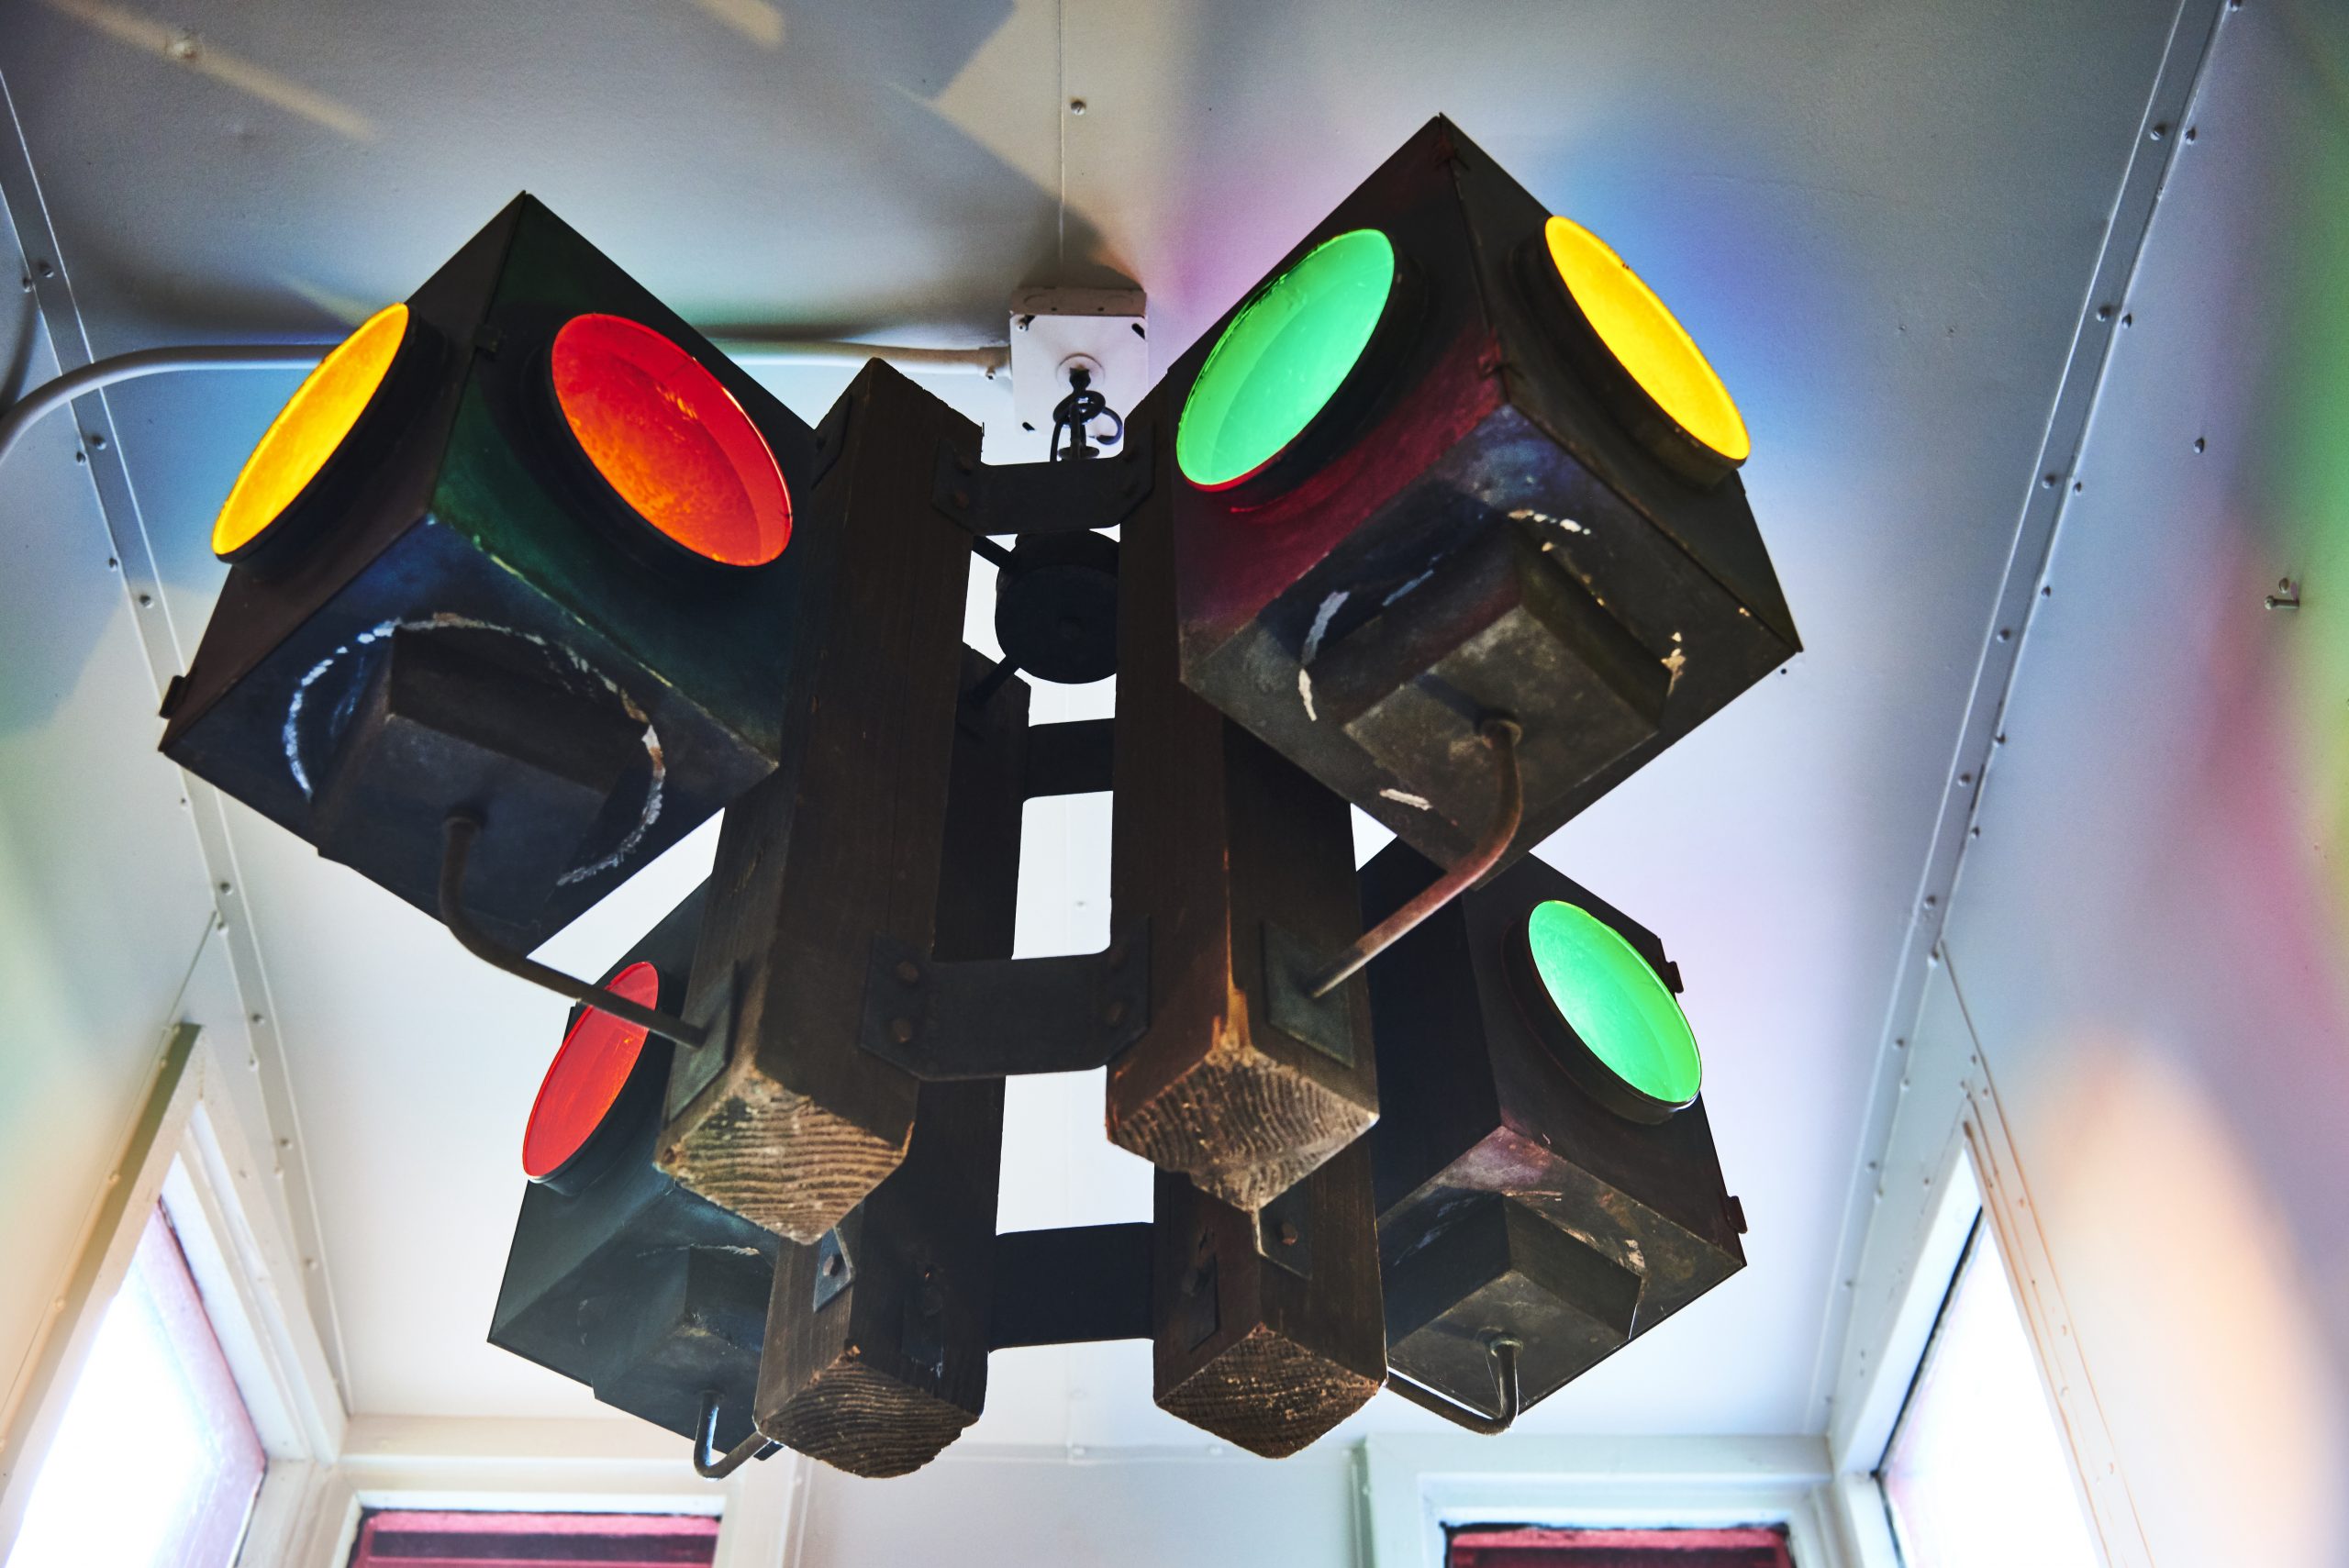 Photo of multi-colored lights hanging in the caboose.